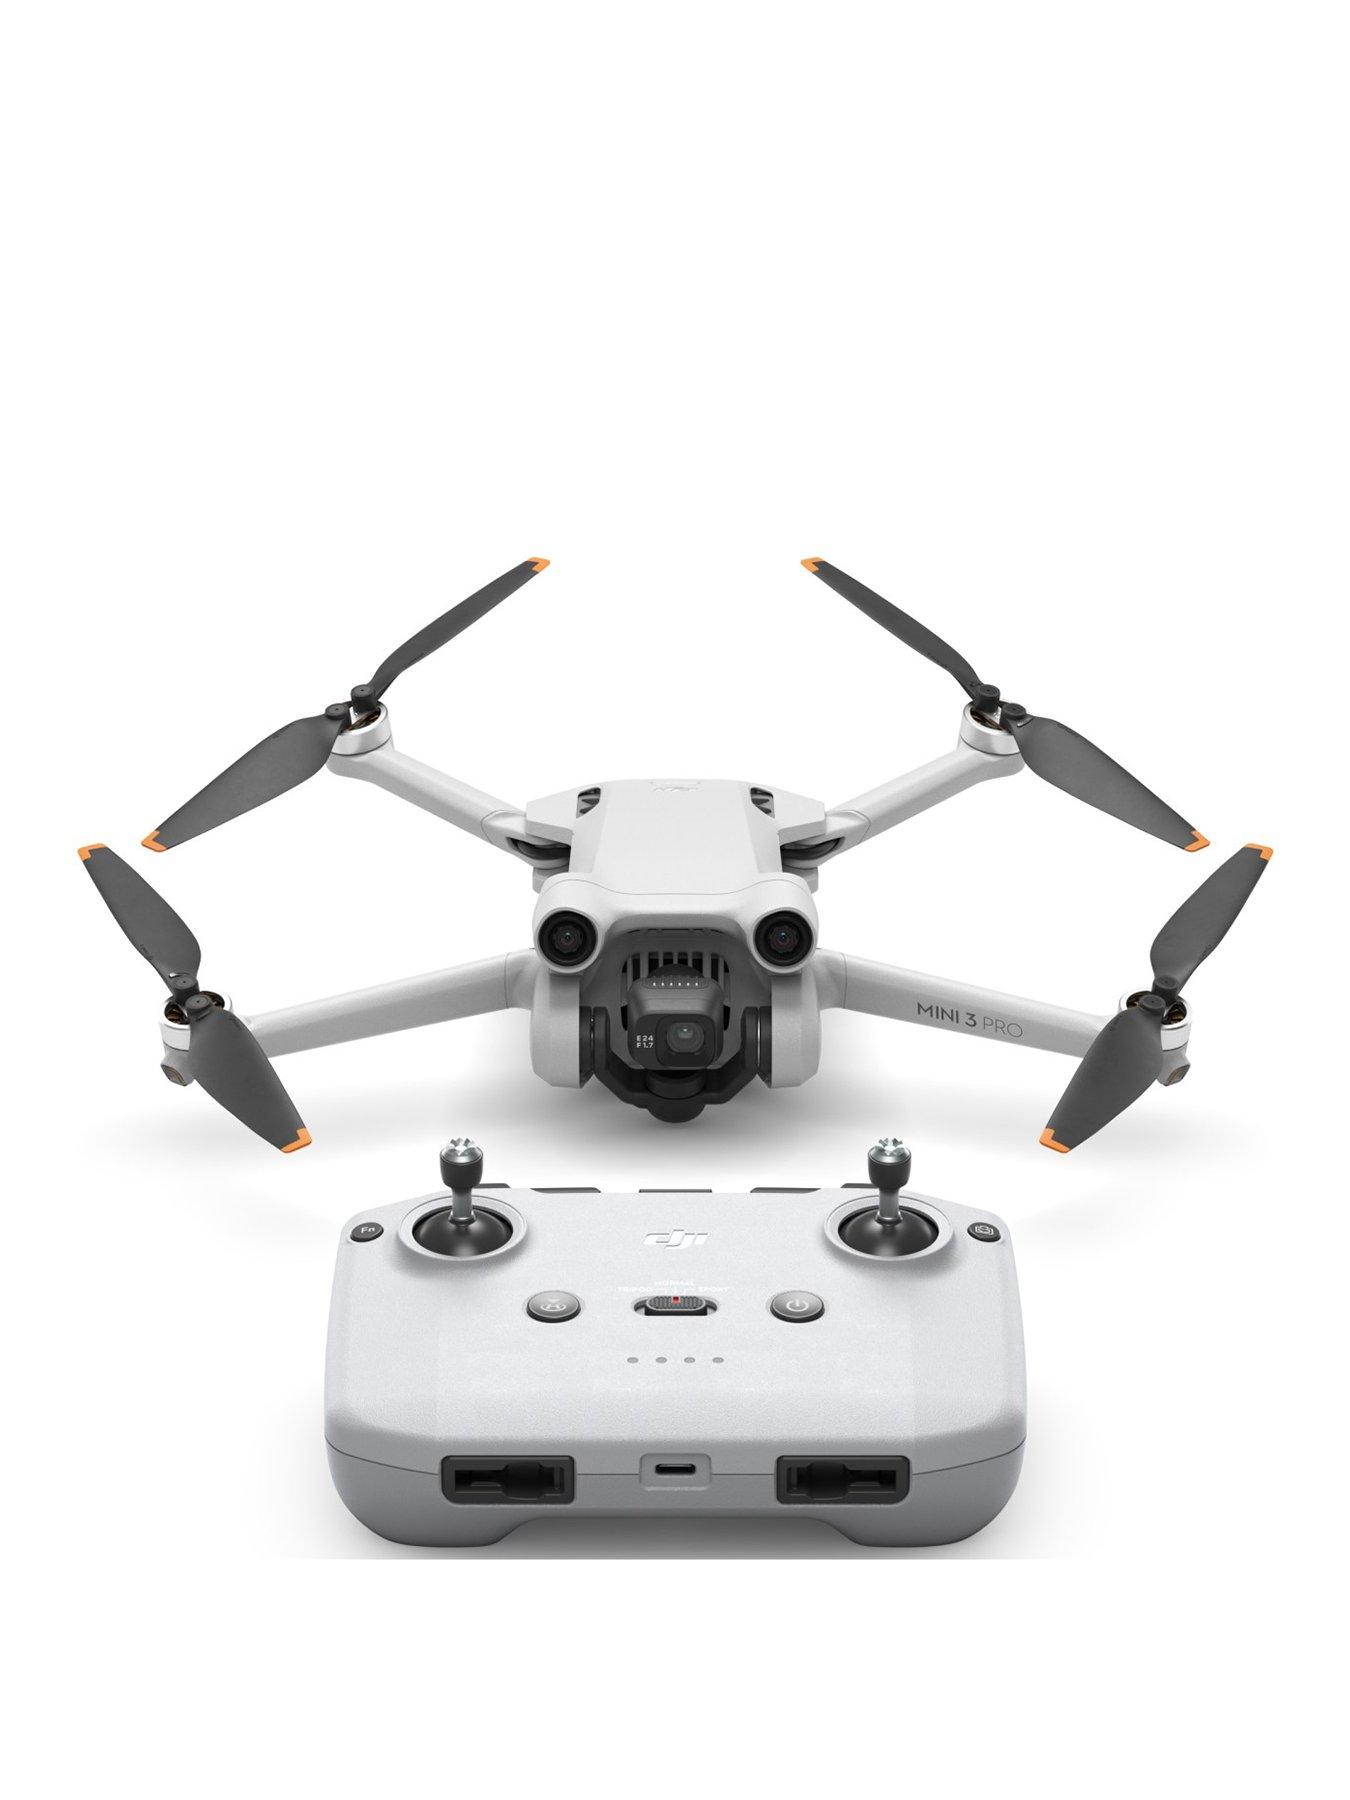 The best thing about the DJI Mini 3 Pro might surprise you